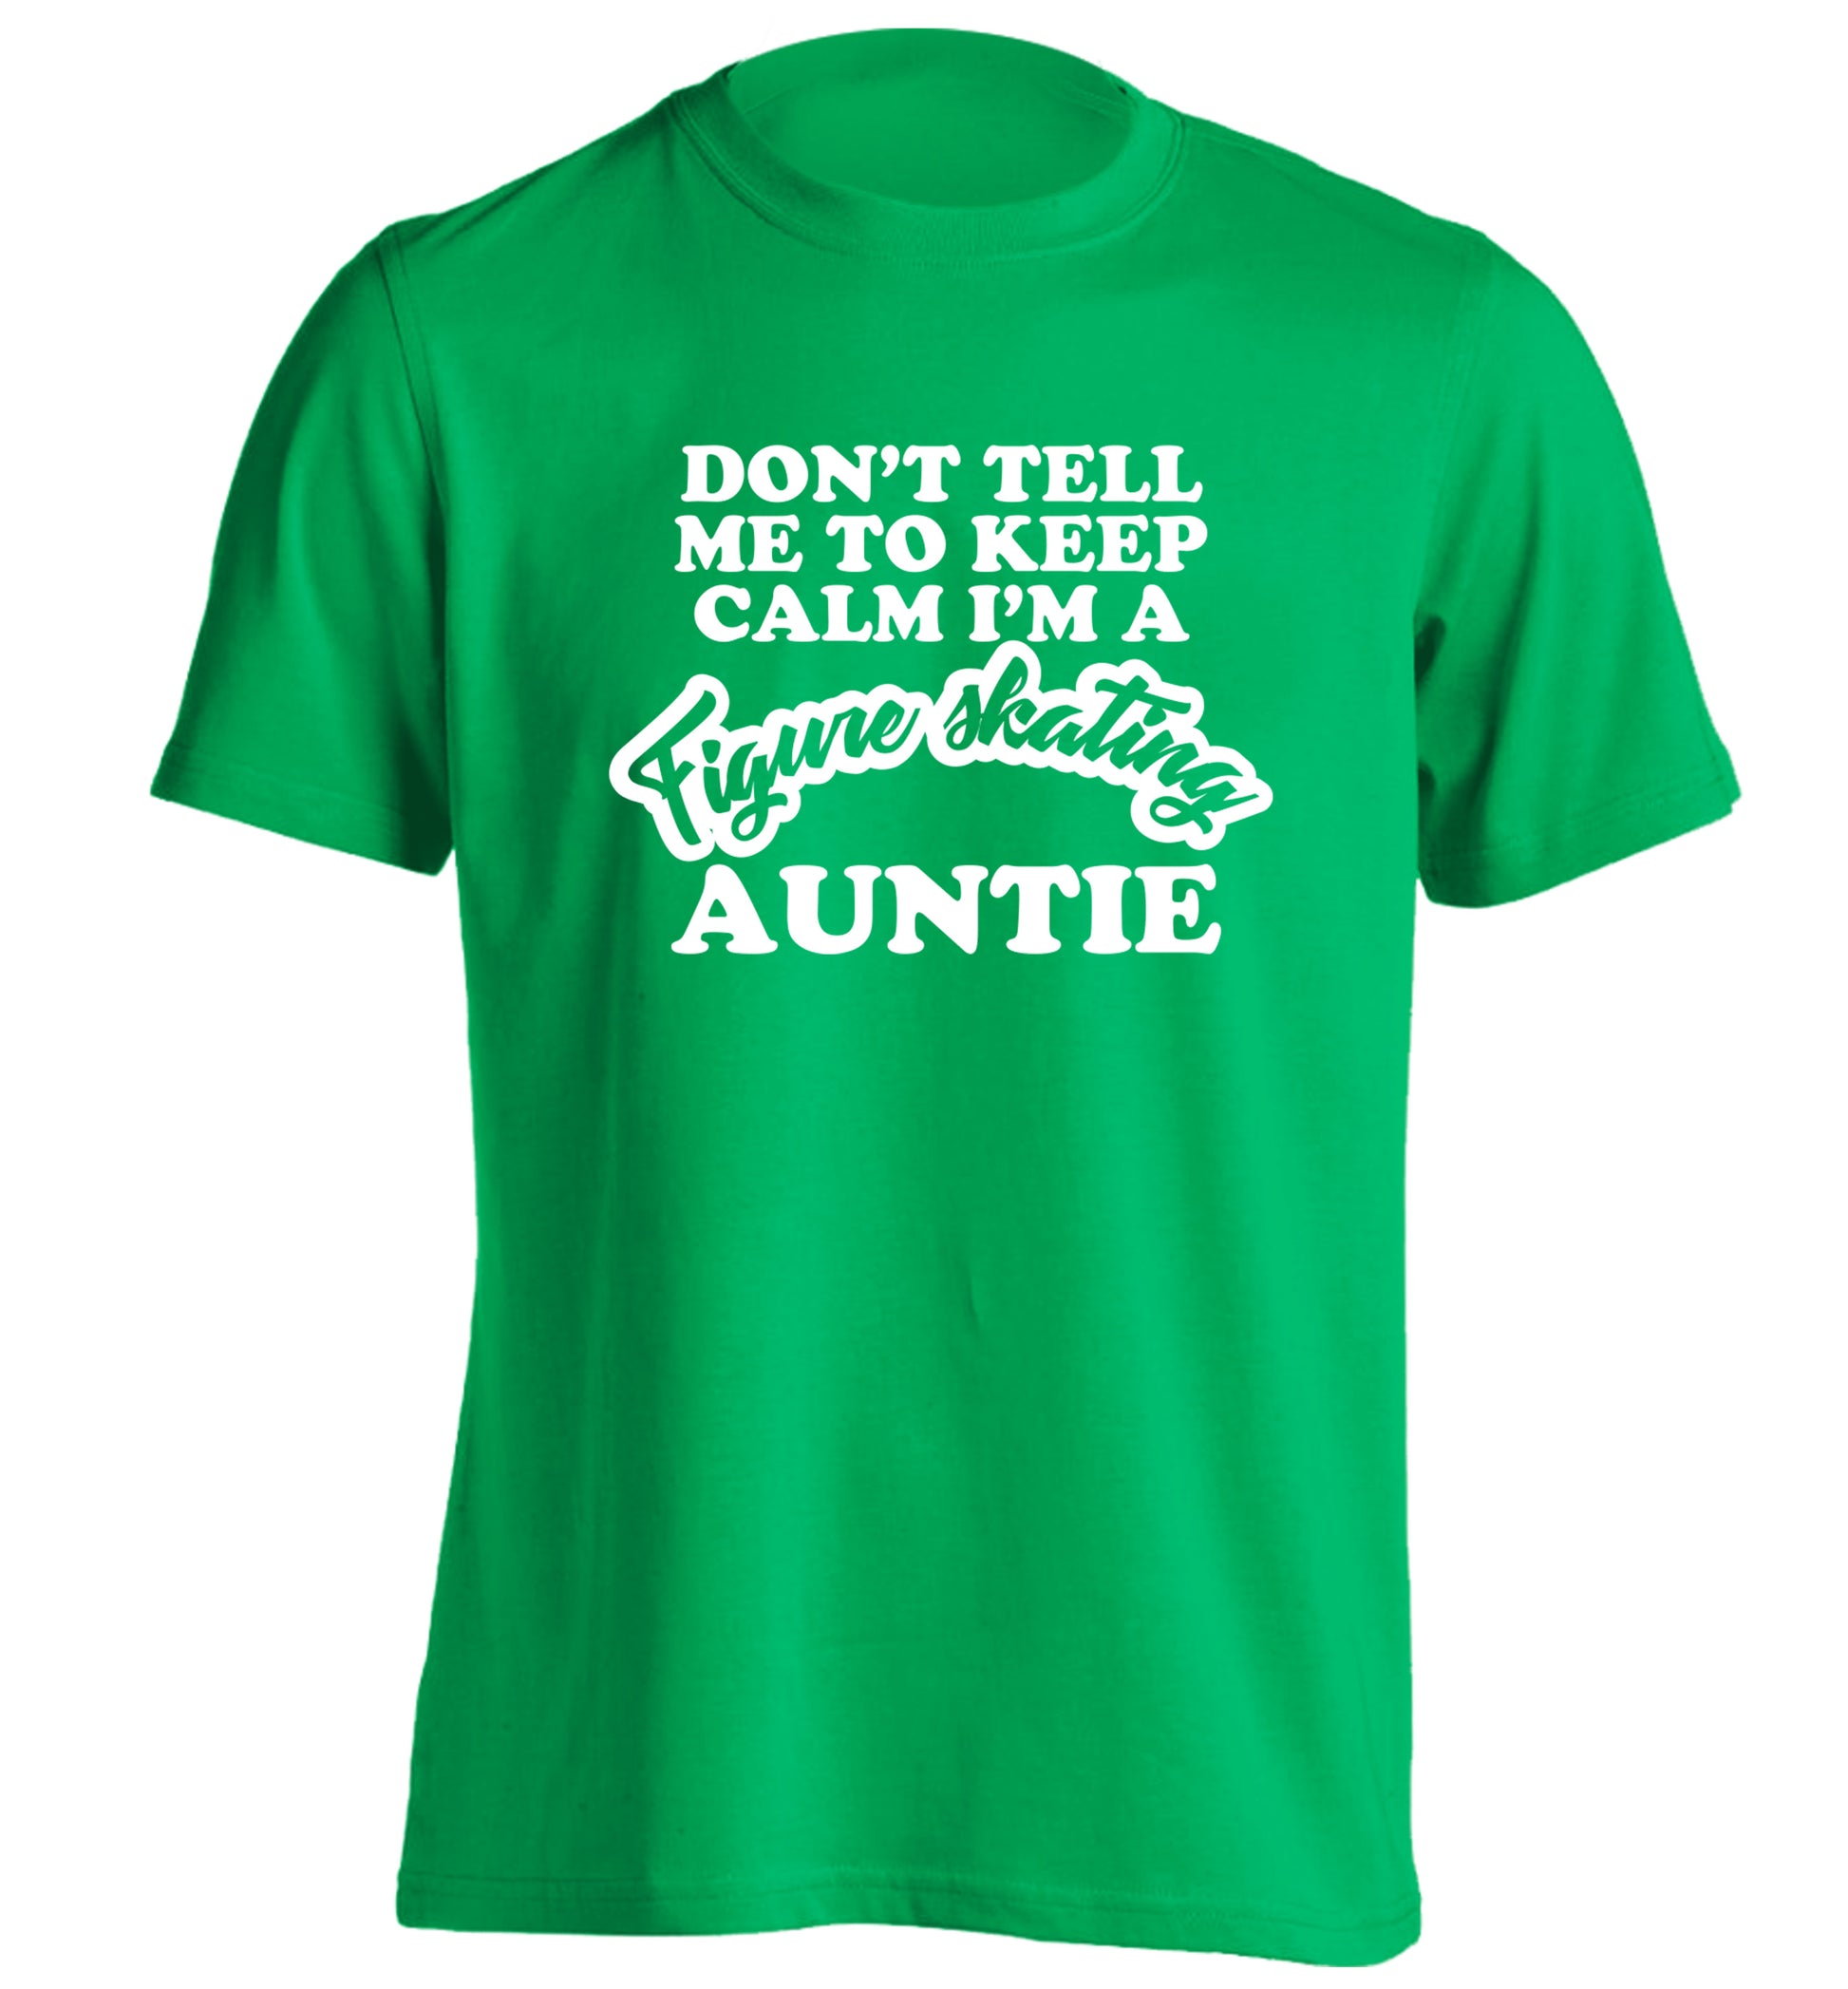 Don't tell me to keep calm I'm a figure skating auntie adults unisexgreen Tshirt 2XL